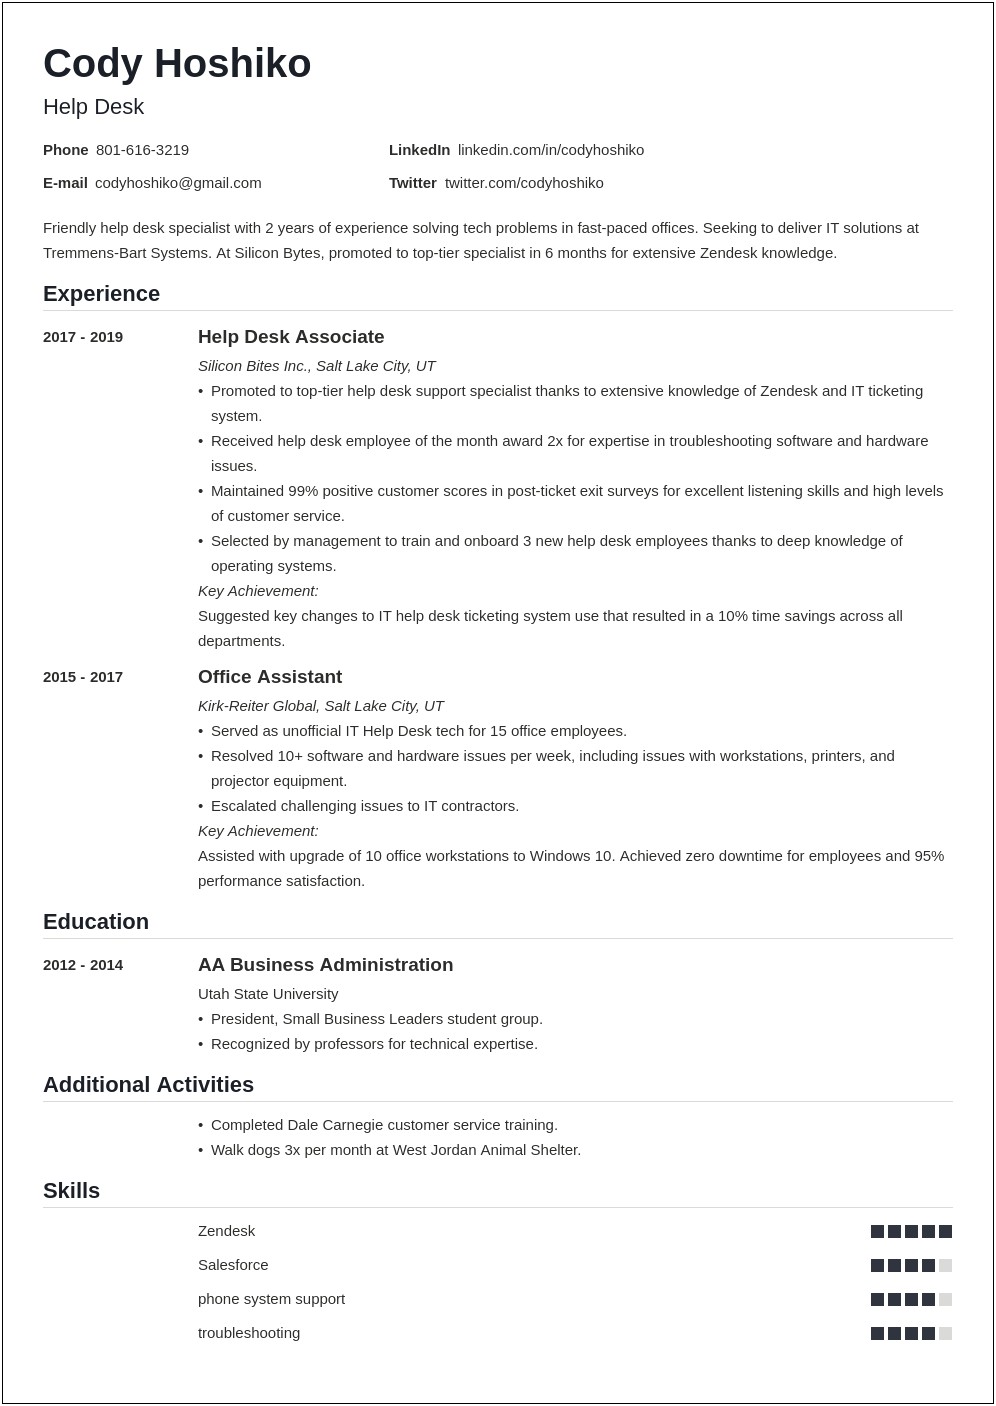 Railroad Conductor Entry Level Resume Examples